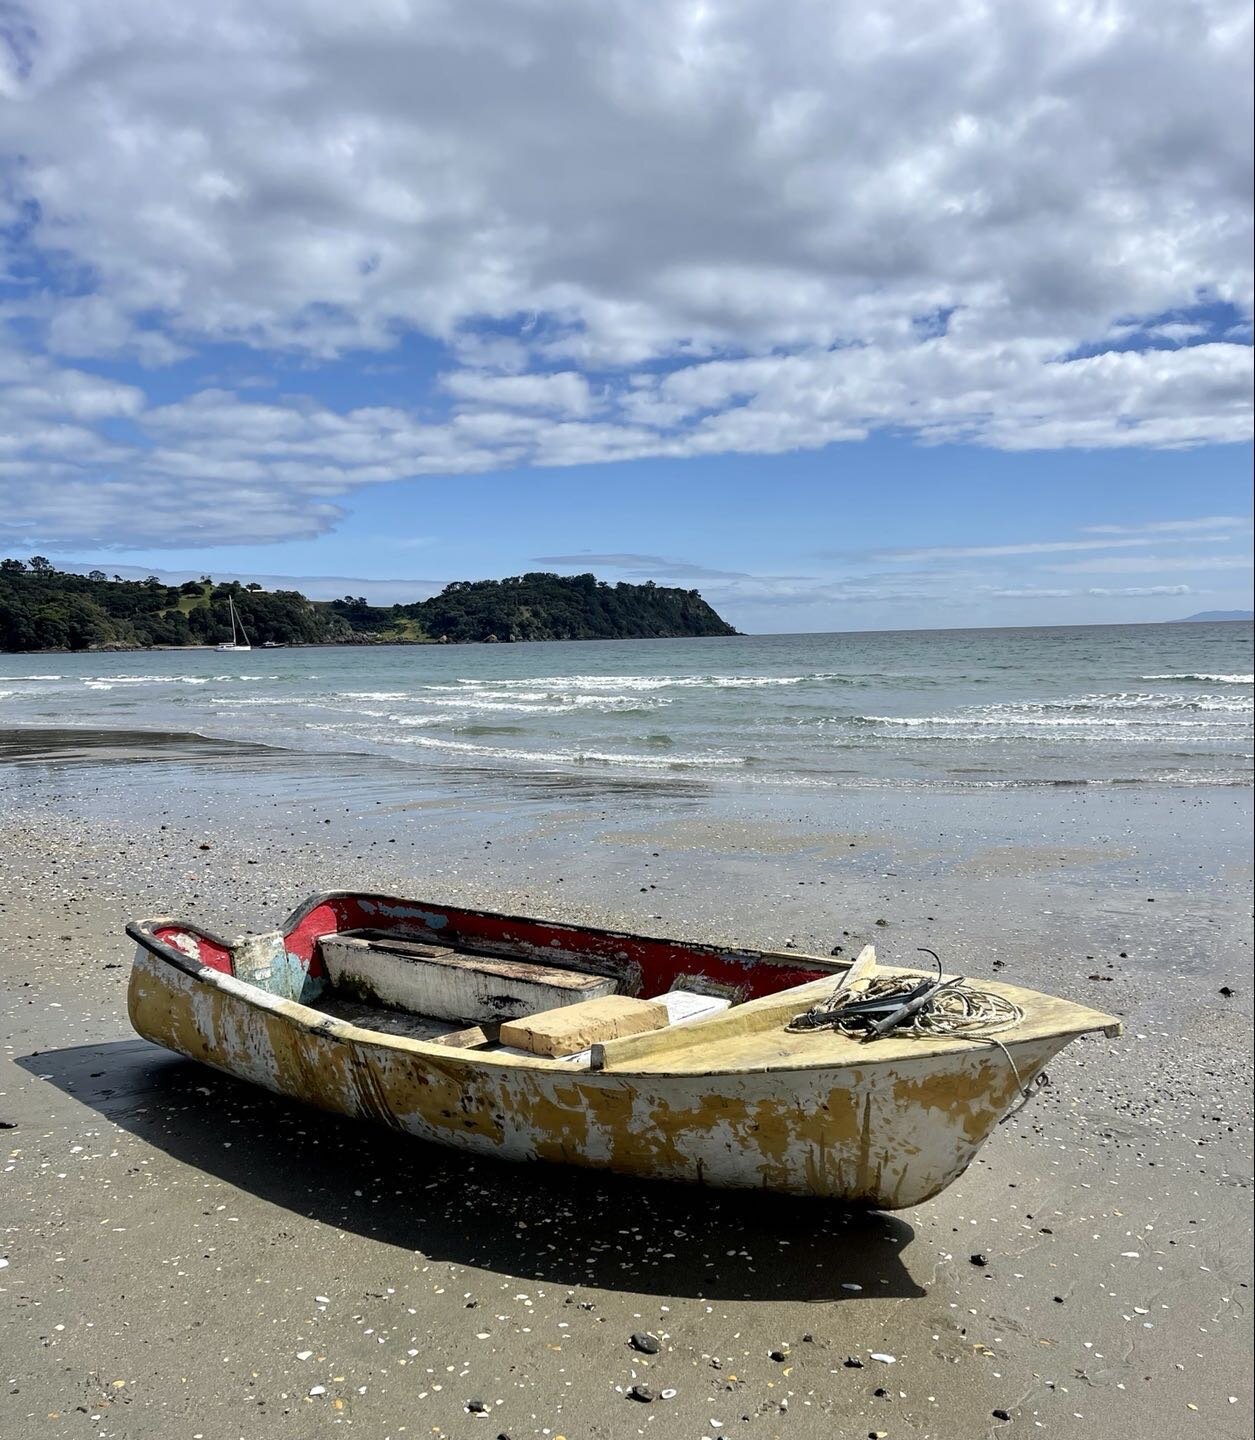 Onetangi def my 🌟ab 🌟fab 🌟fav beach in NZ 💙🌊☀️🛶🐚we are doing a mid week stay 3/pay 2 at Wavesong and The Hibiscus for the next 2 months - escape to the best wee beach community in NZ 💕💋